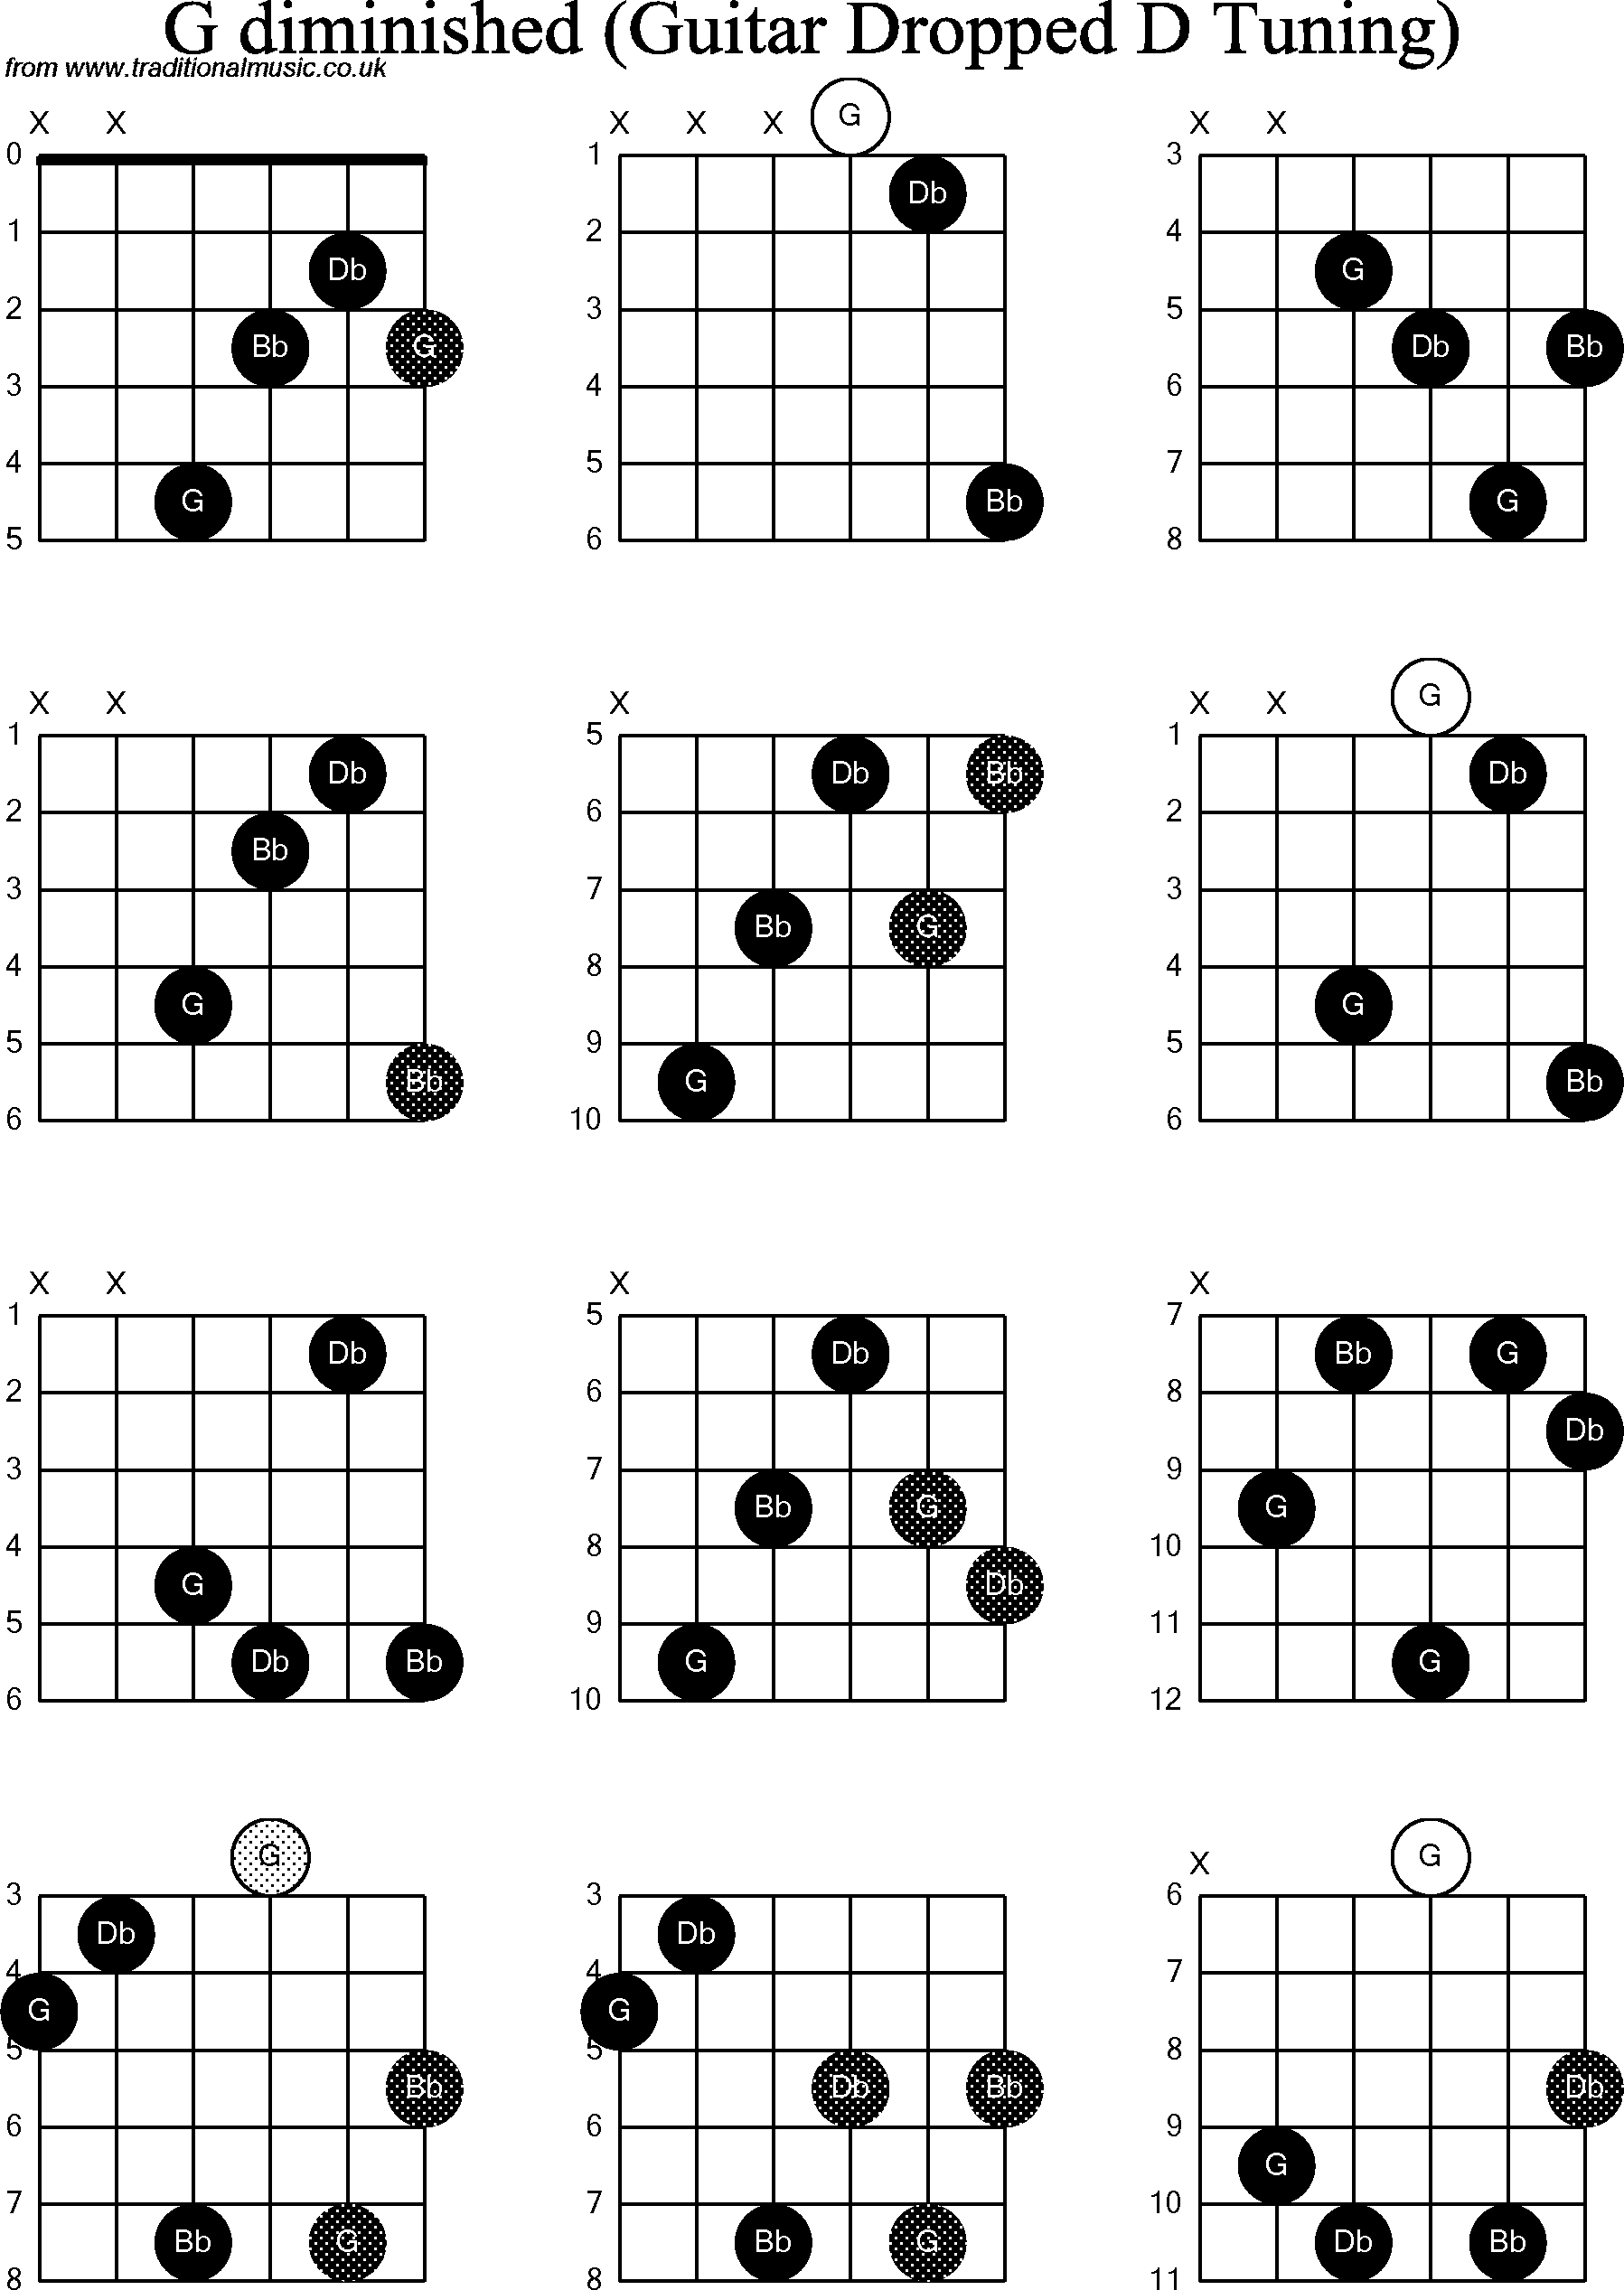 Chord diagrams for dropped D Guitar(DADGBE), G Diminished